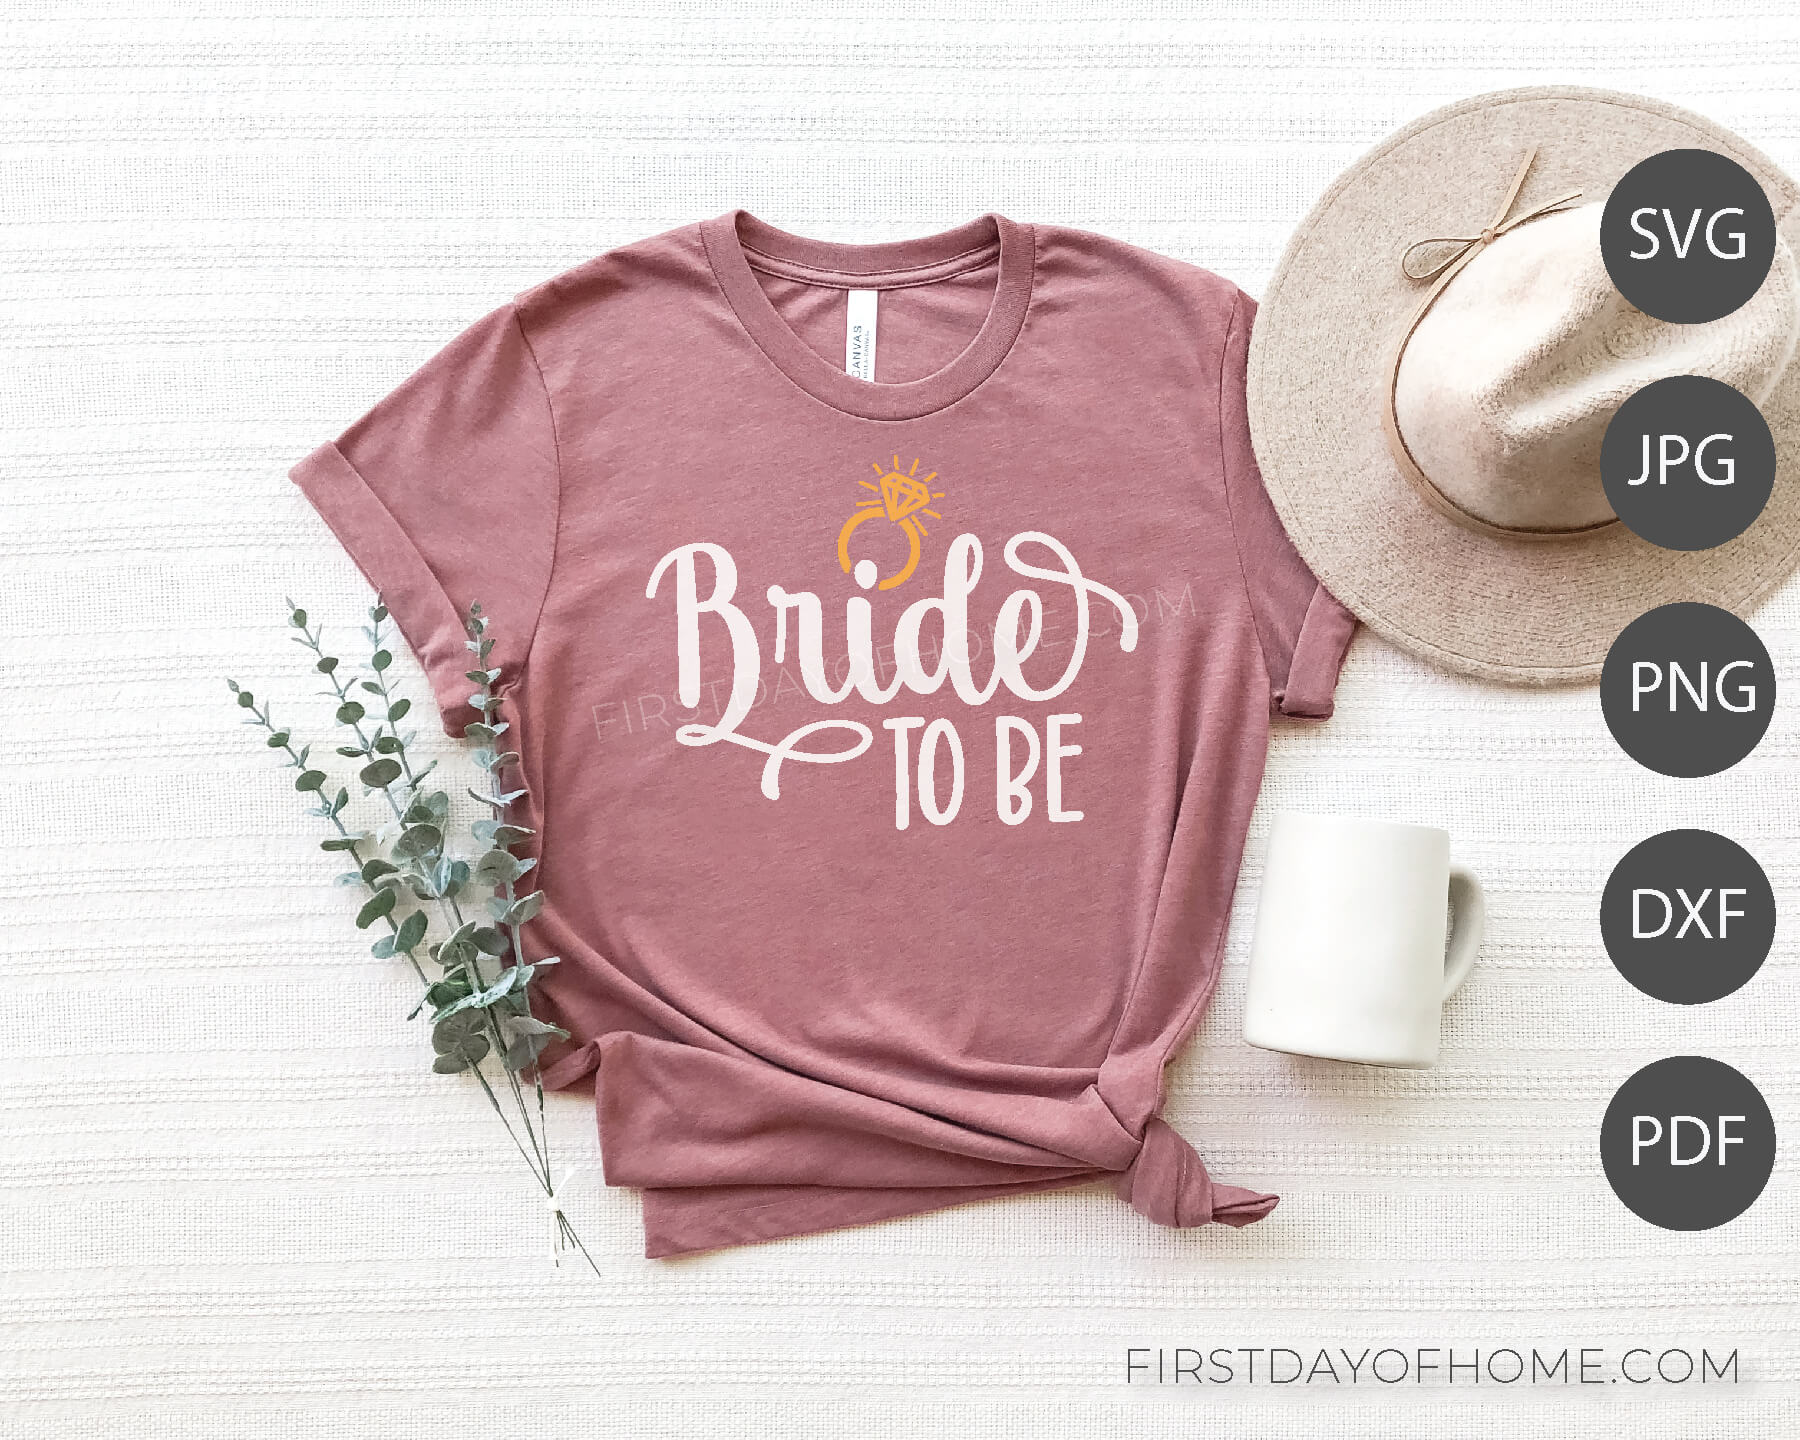 T-shirt mockup with "Bride to Be" digital design, shown with hat, mug and eucalyptus branches